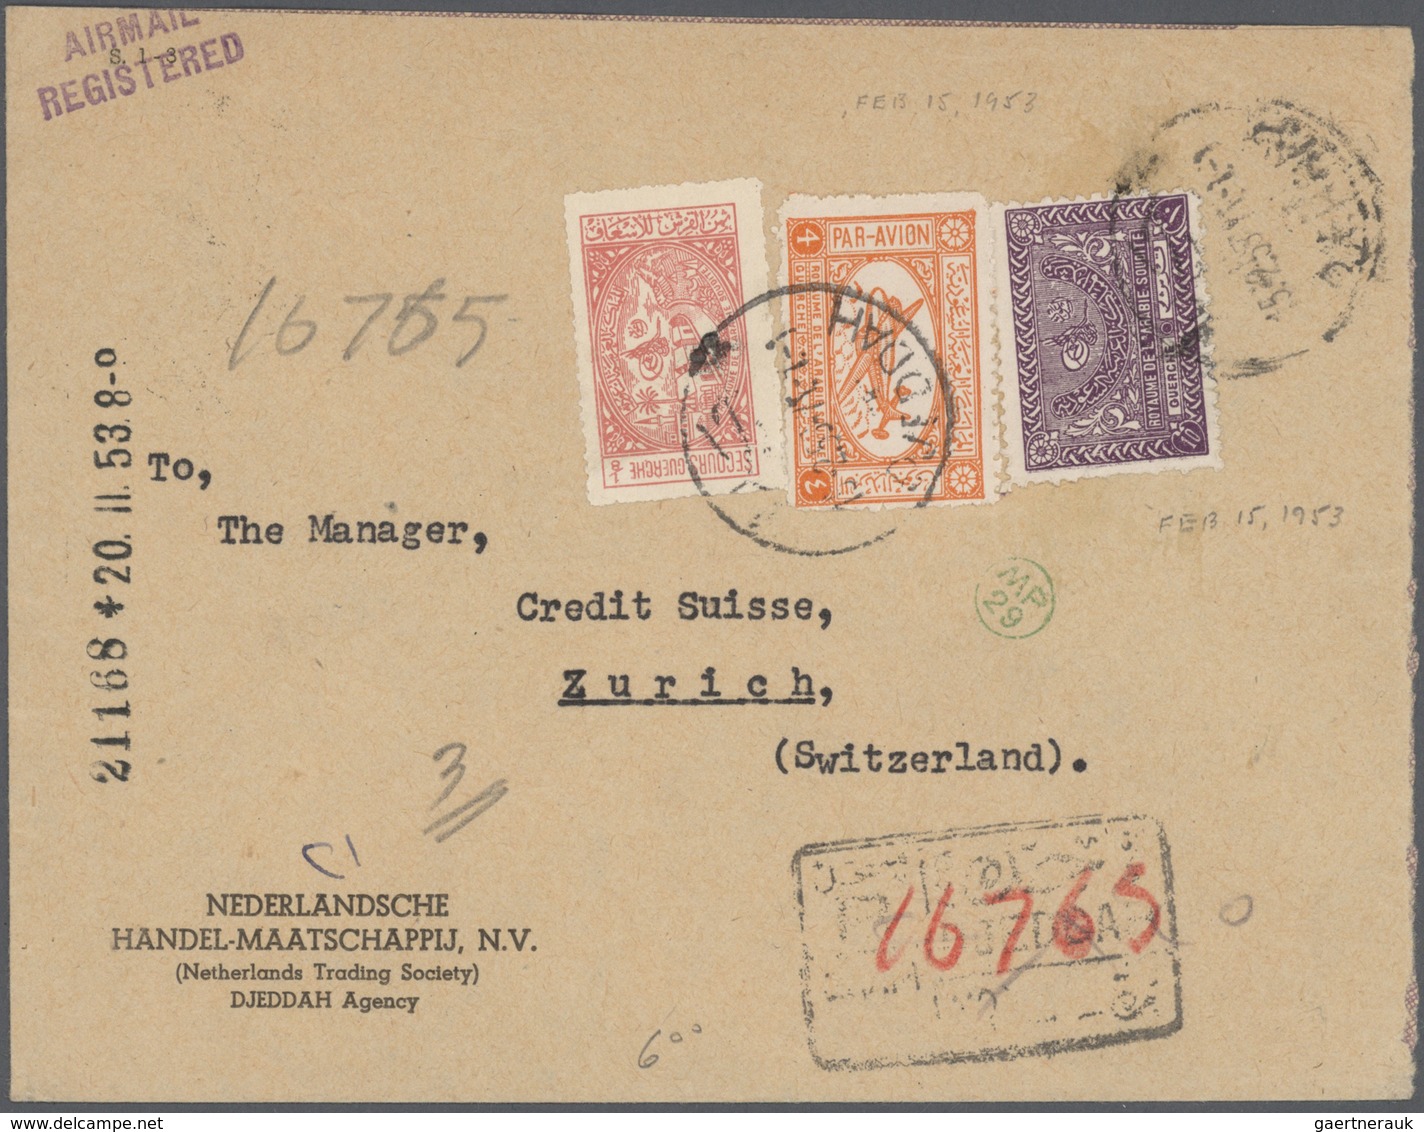 23979 Saudi-Arabien: 1947-75, 36 Covers Including Registered Mail And Air Mails, Attractive Frankings. - Arabie Saoudite